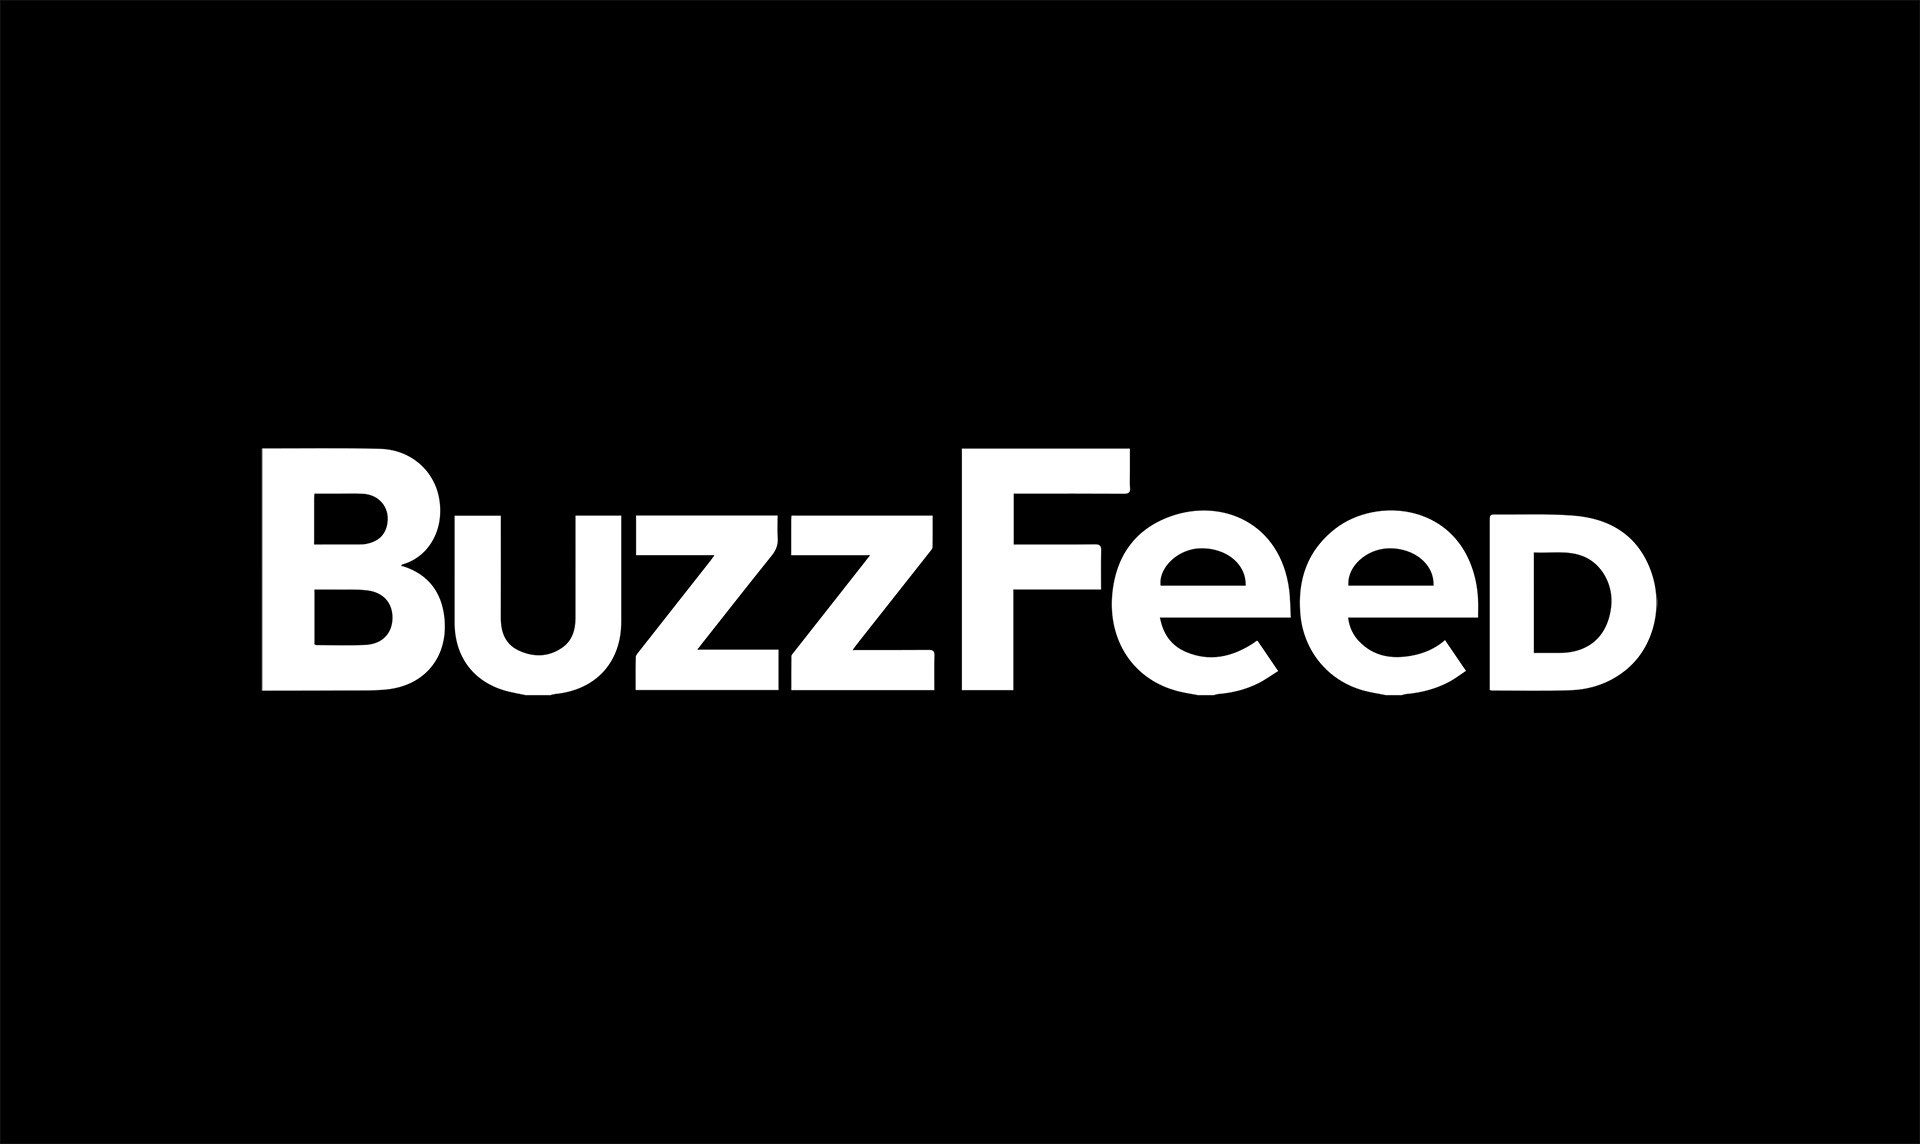 The logo of buzzfeed, featuring bold white letters on a stark black background.